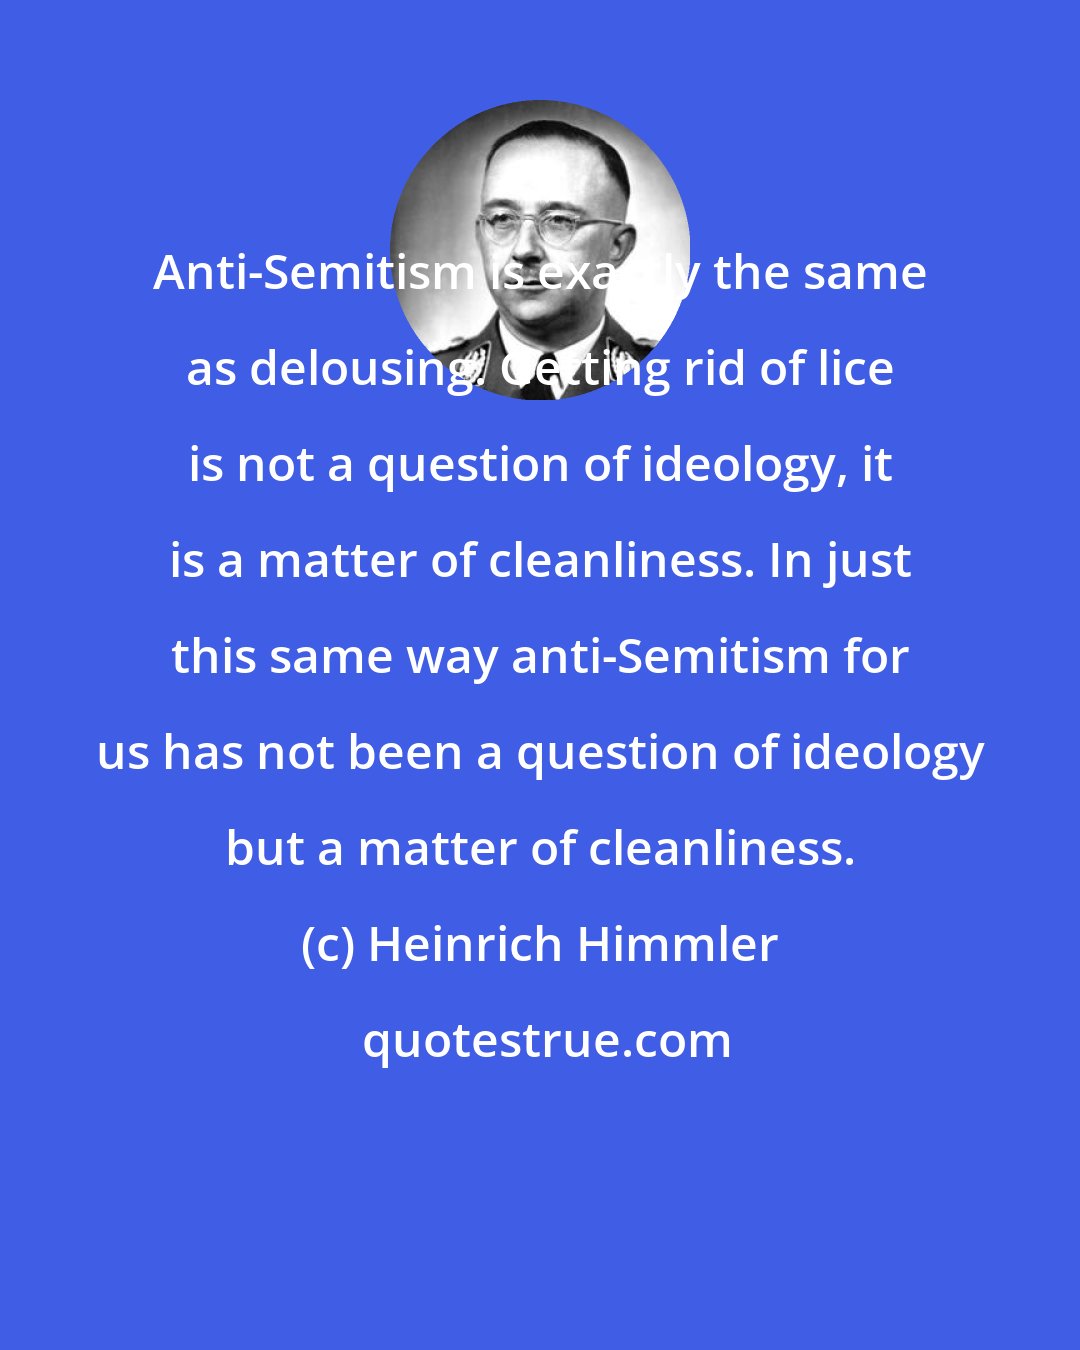 Heinrich Himmler: Anti-Semitism is exactly the same as delousing. Getting rid of lice is not a question of ideology, it is a matter of cleanliness. In just this same way anti-Semitism for us has not been a question of ideology but a matter of cleanliness.